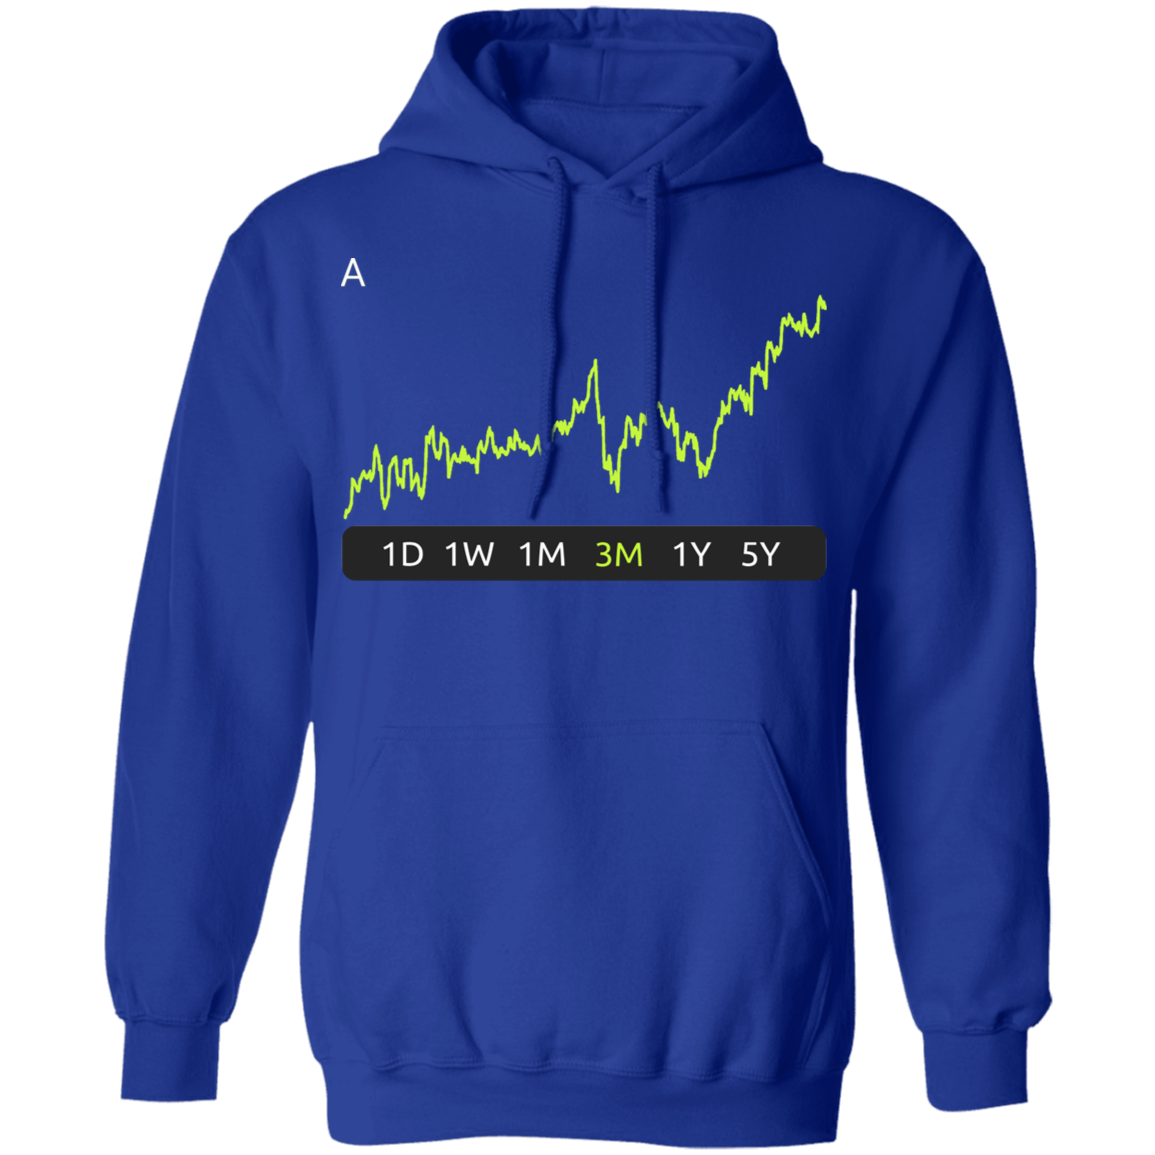 A Stock 3m Pullover Hoodie